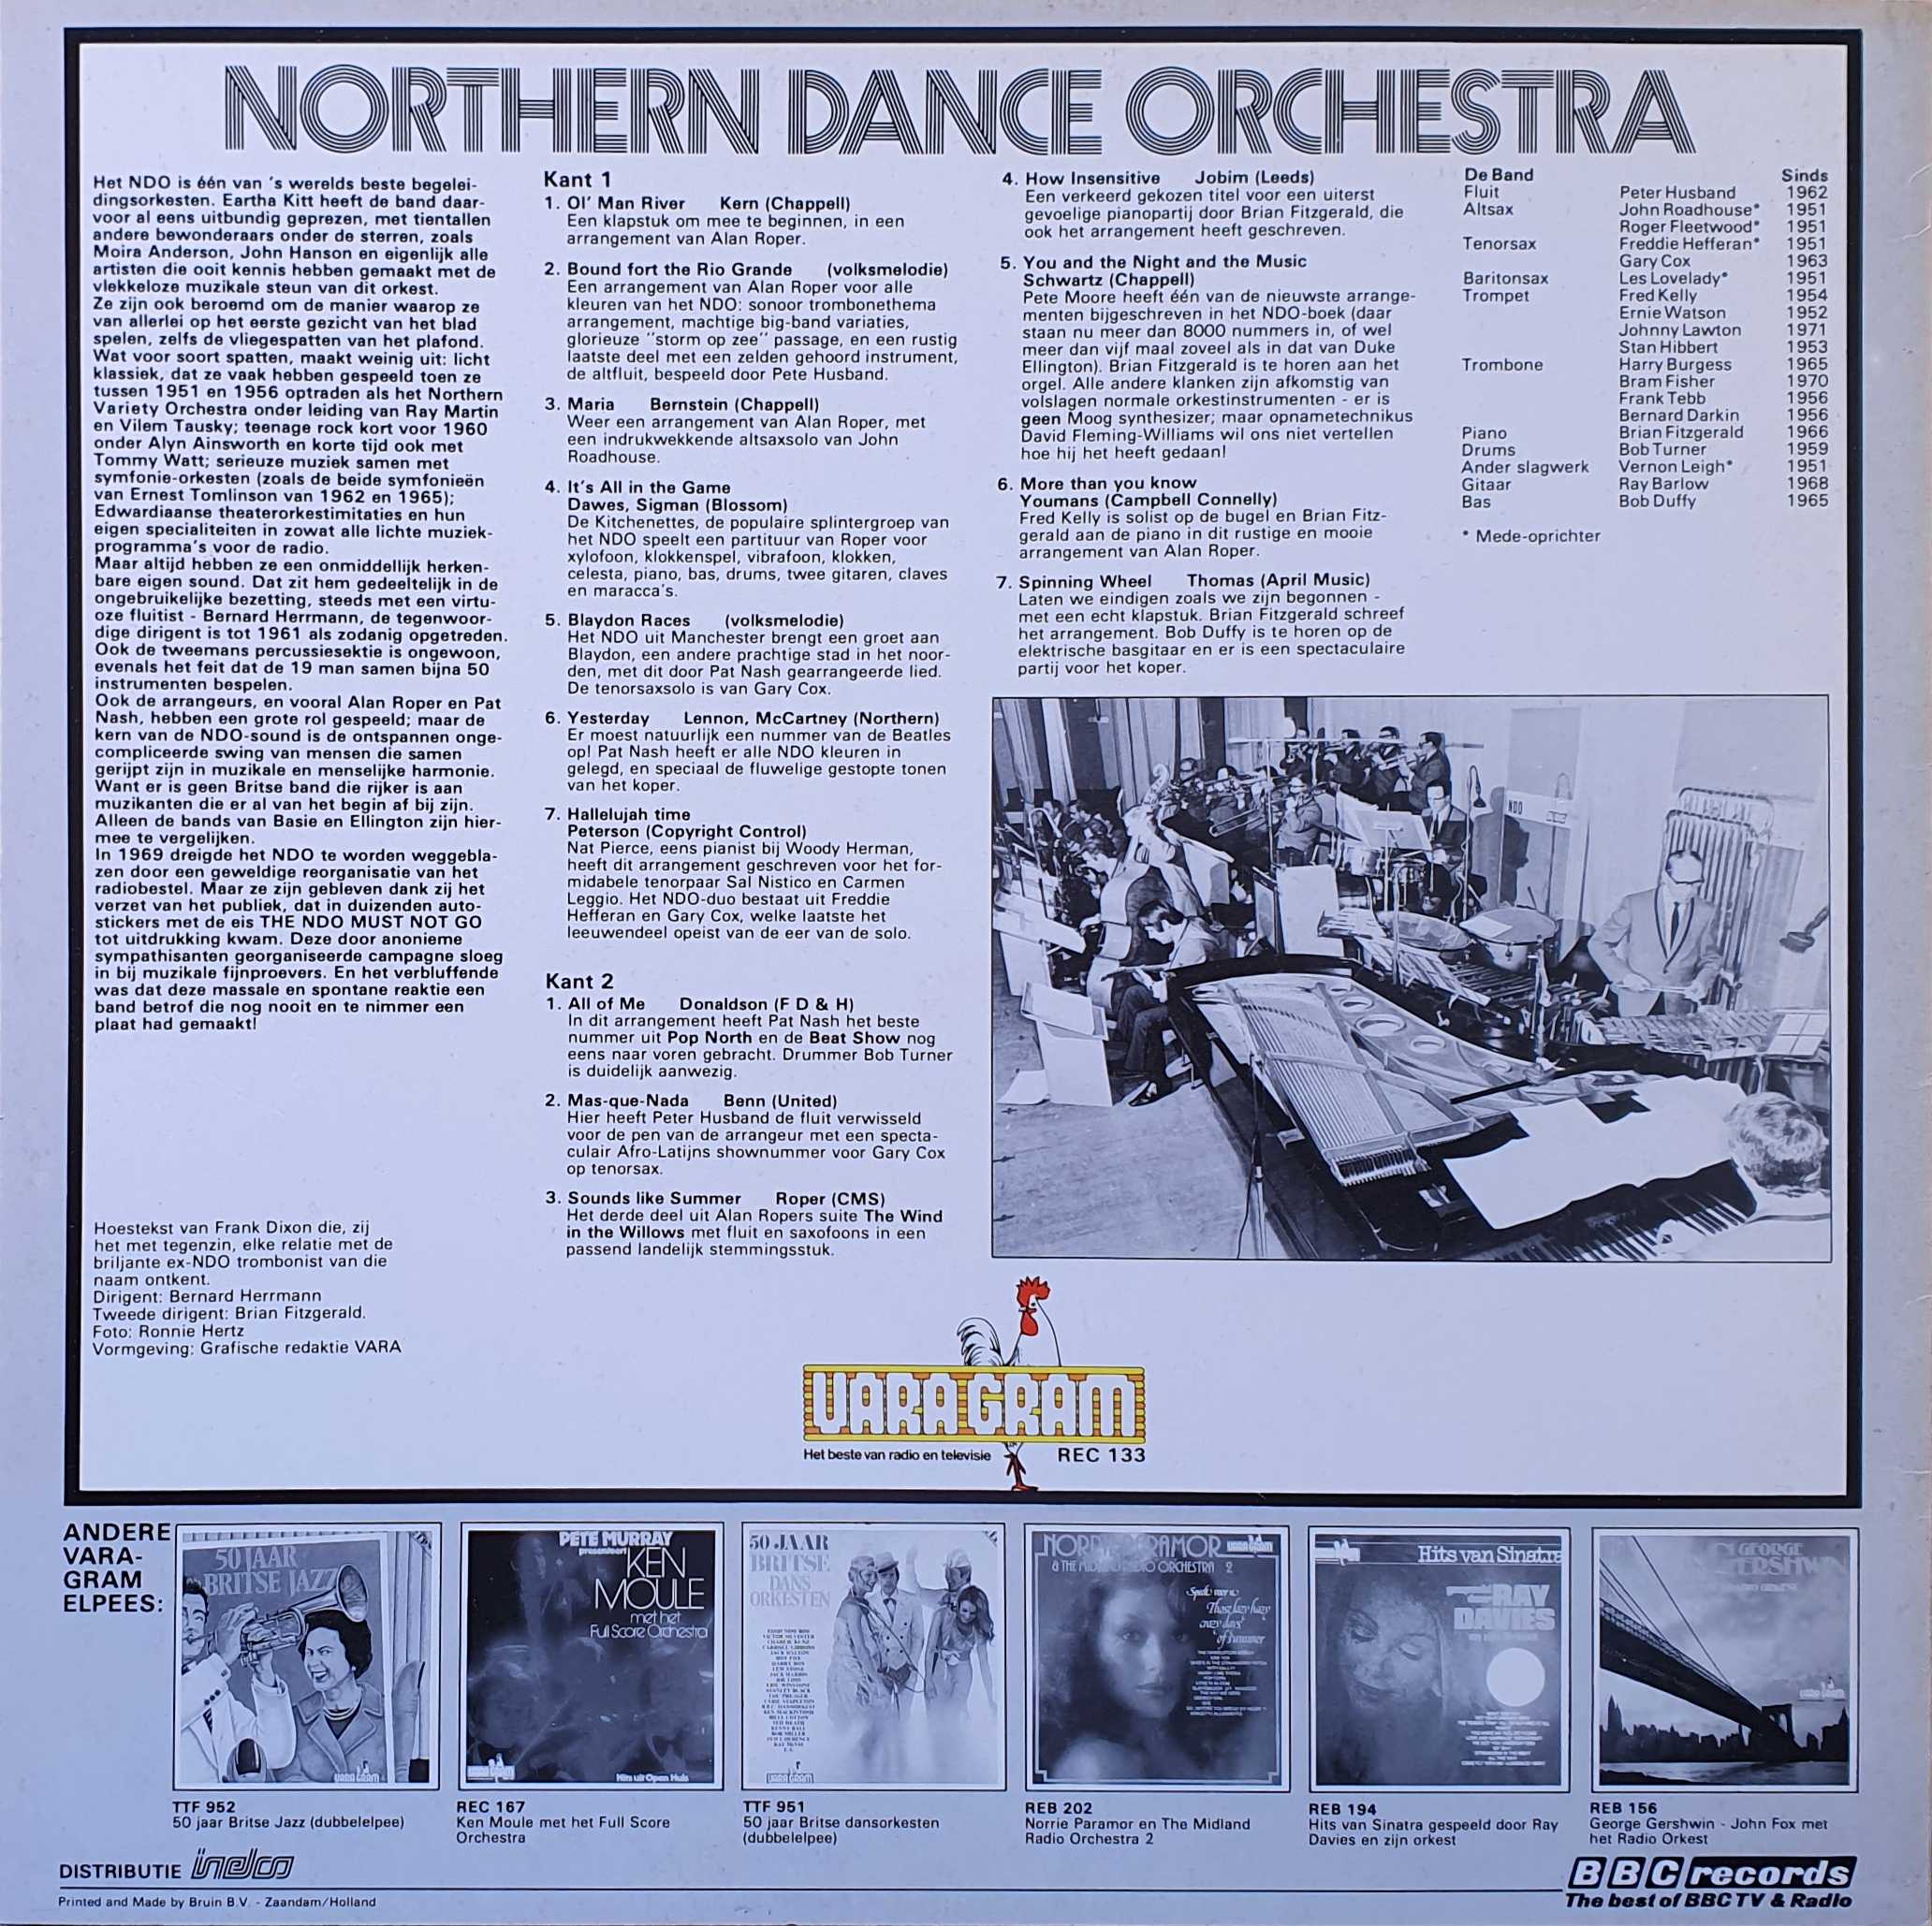 Picture of REC 133-iD Northern dance orchestra by artist Various from the BBC records and Tapes library